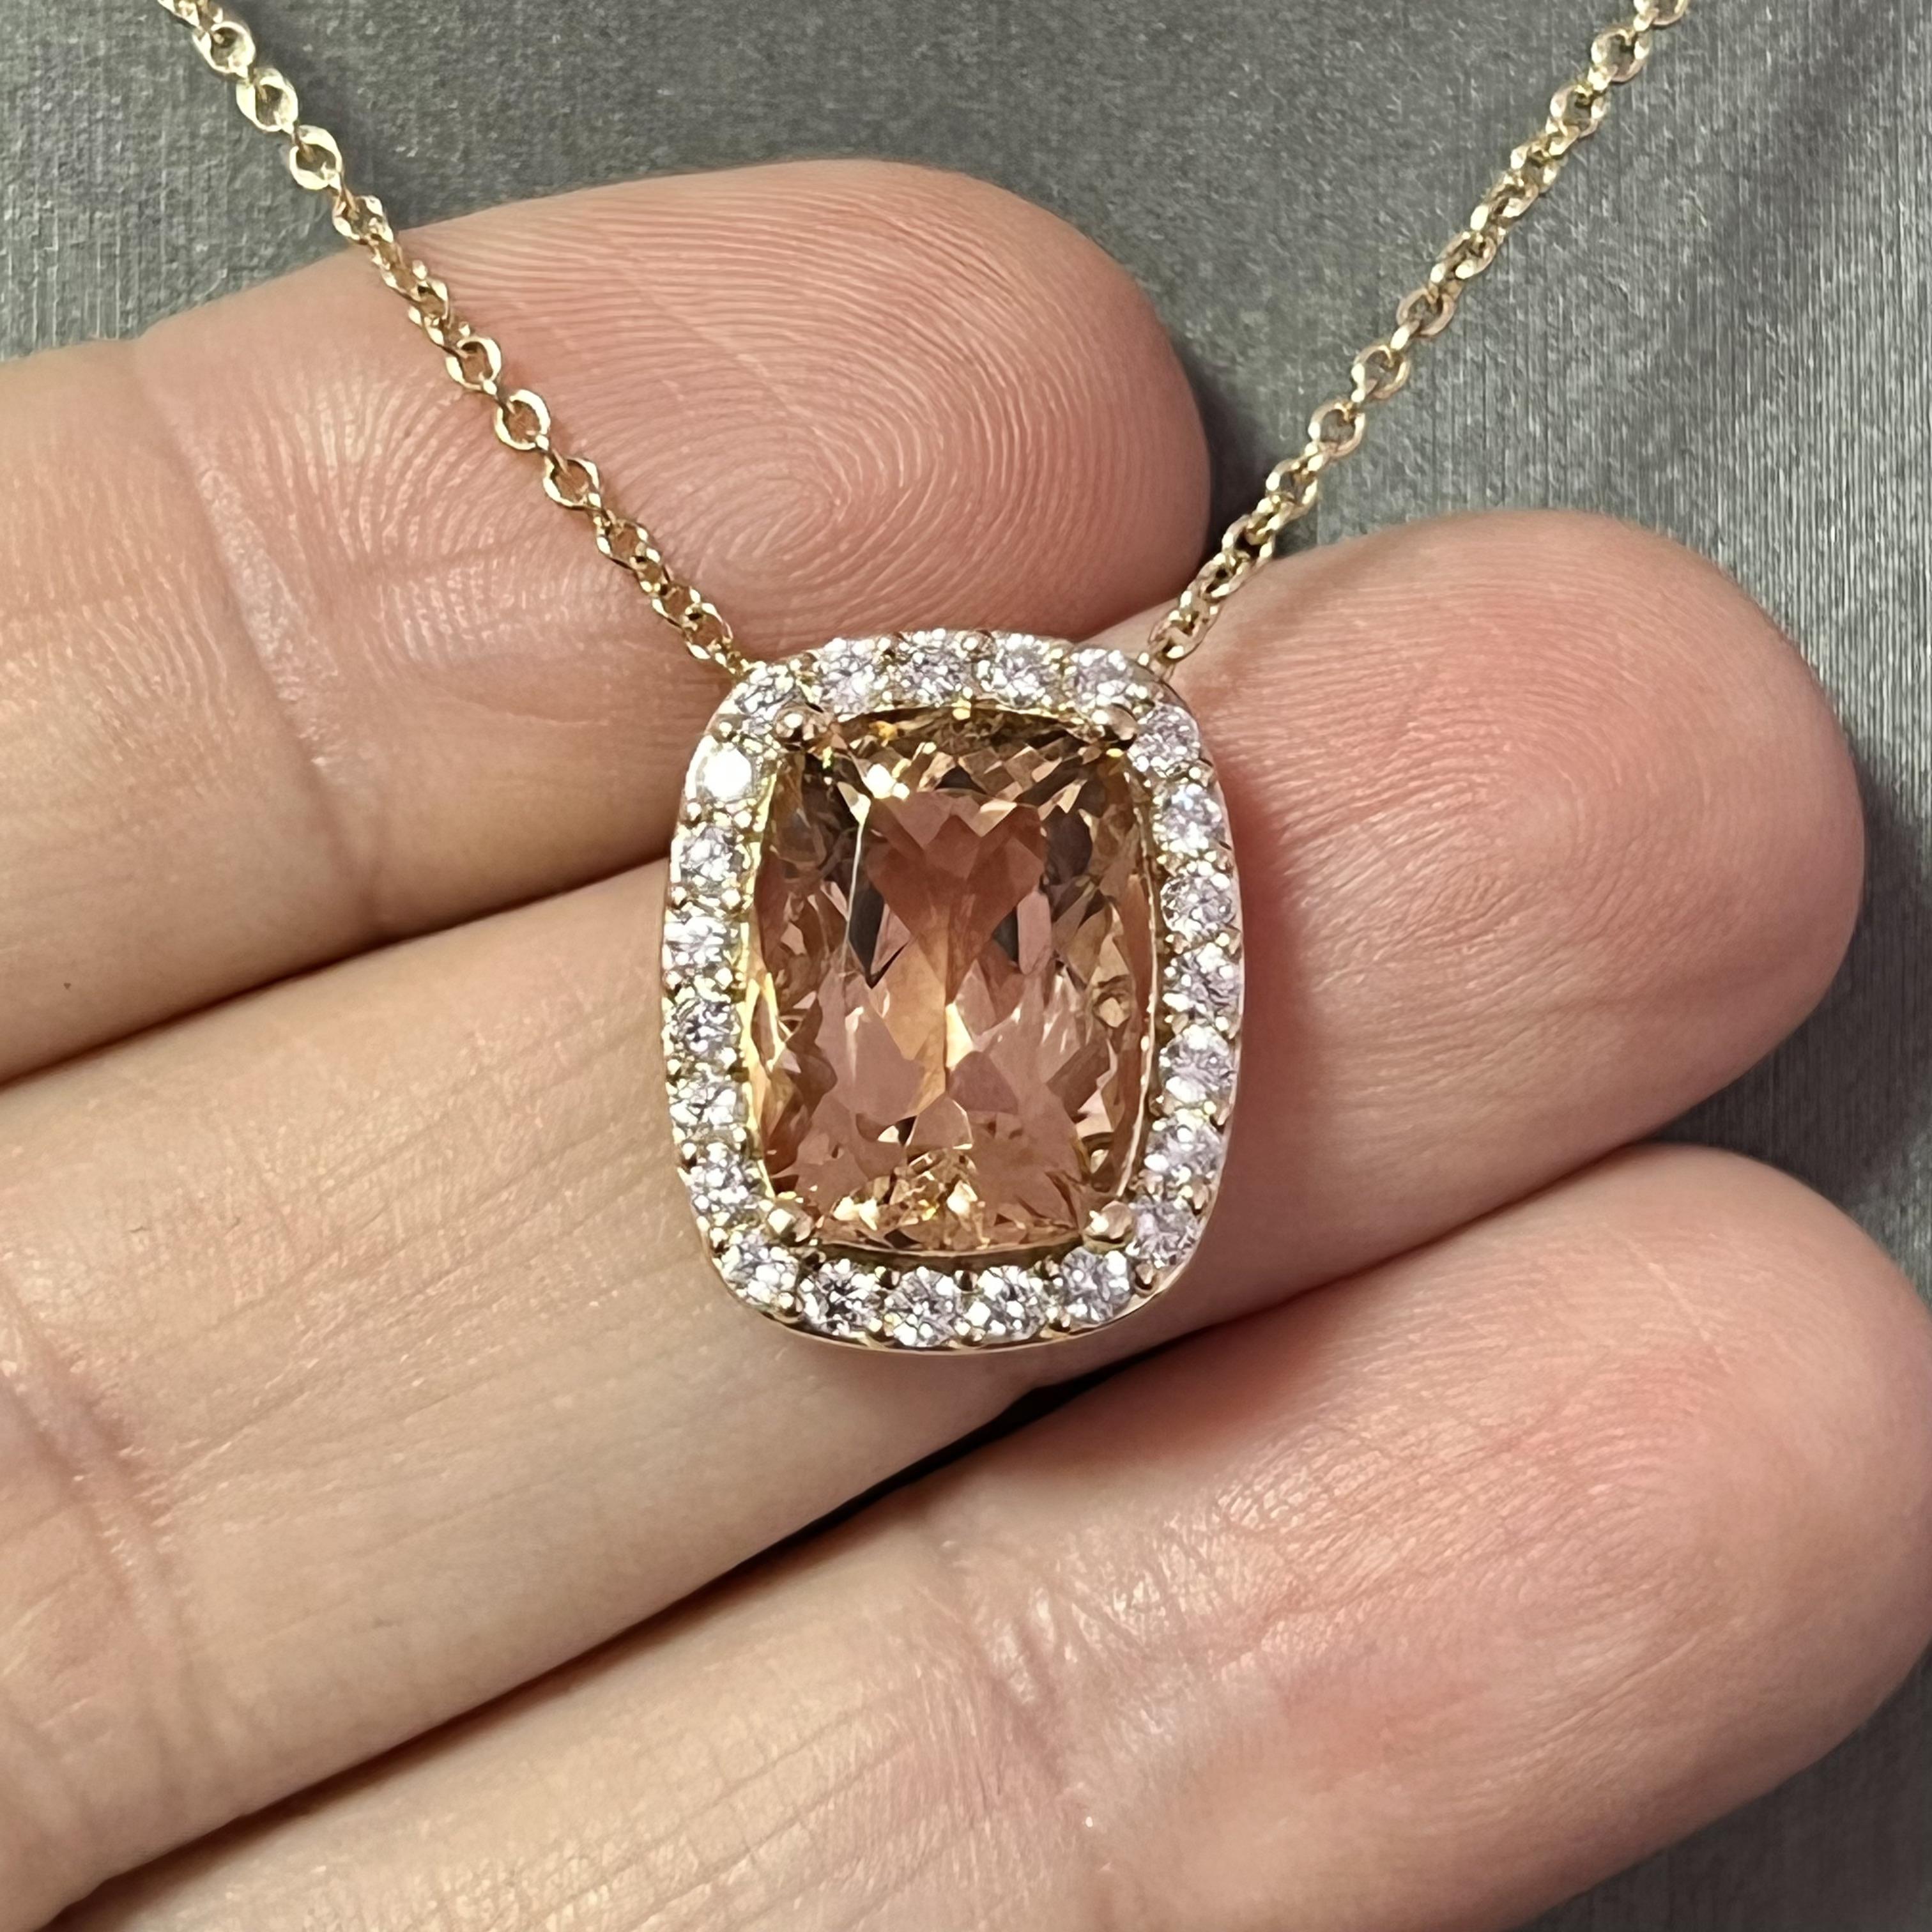 Diamond Morganite Pendant Necklace 14k Gold 7.35 TCW Certified In New Condition For Sale In Brooklyn, NY